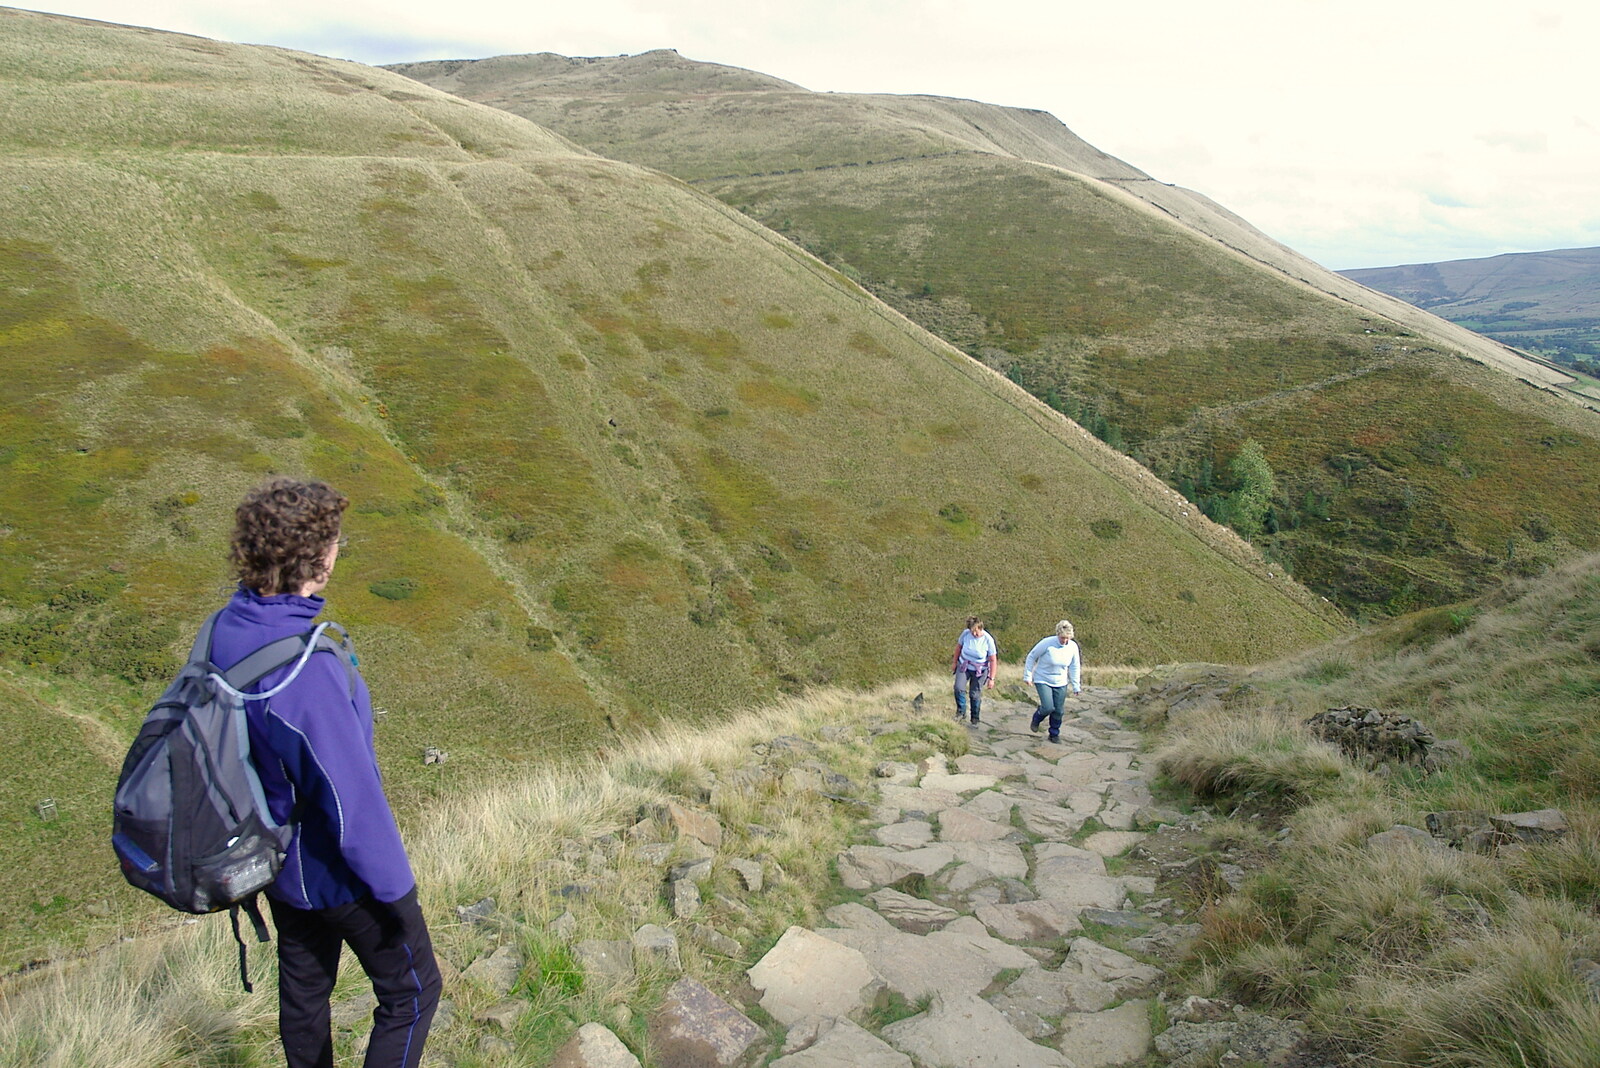 The Pennine Way: Lost on Kinder Scout, Derbyshire - 9th October 2005: More walkers in the hills